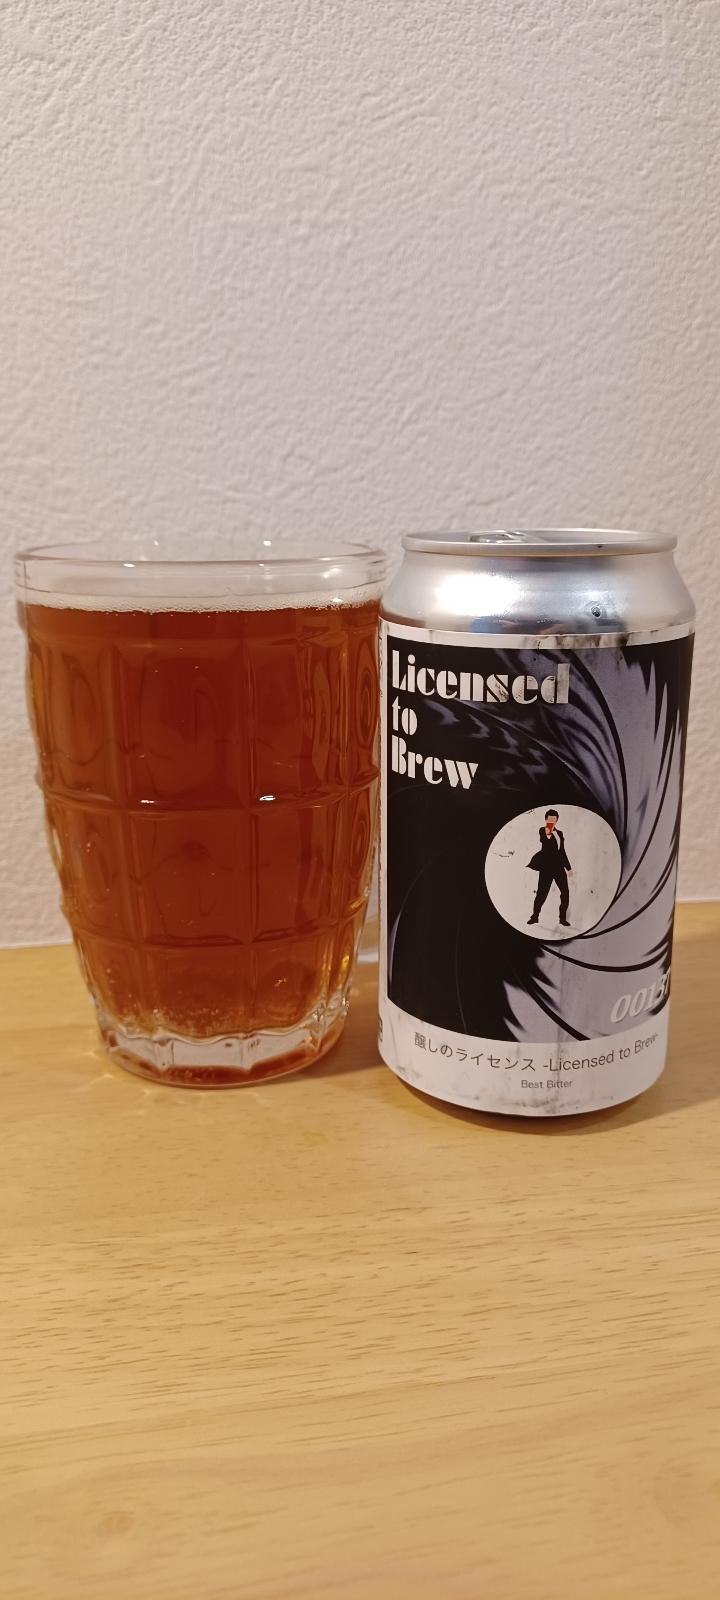 Licensed to Brew